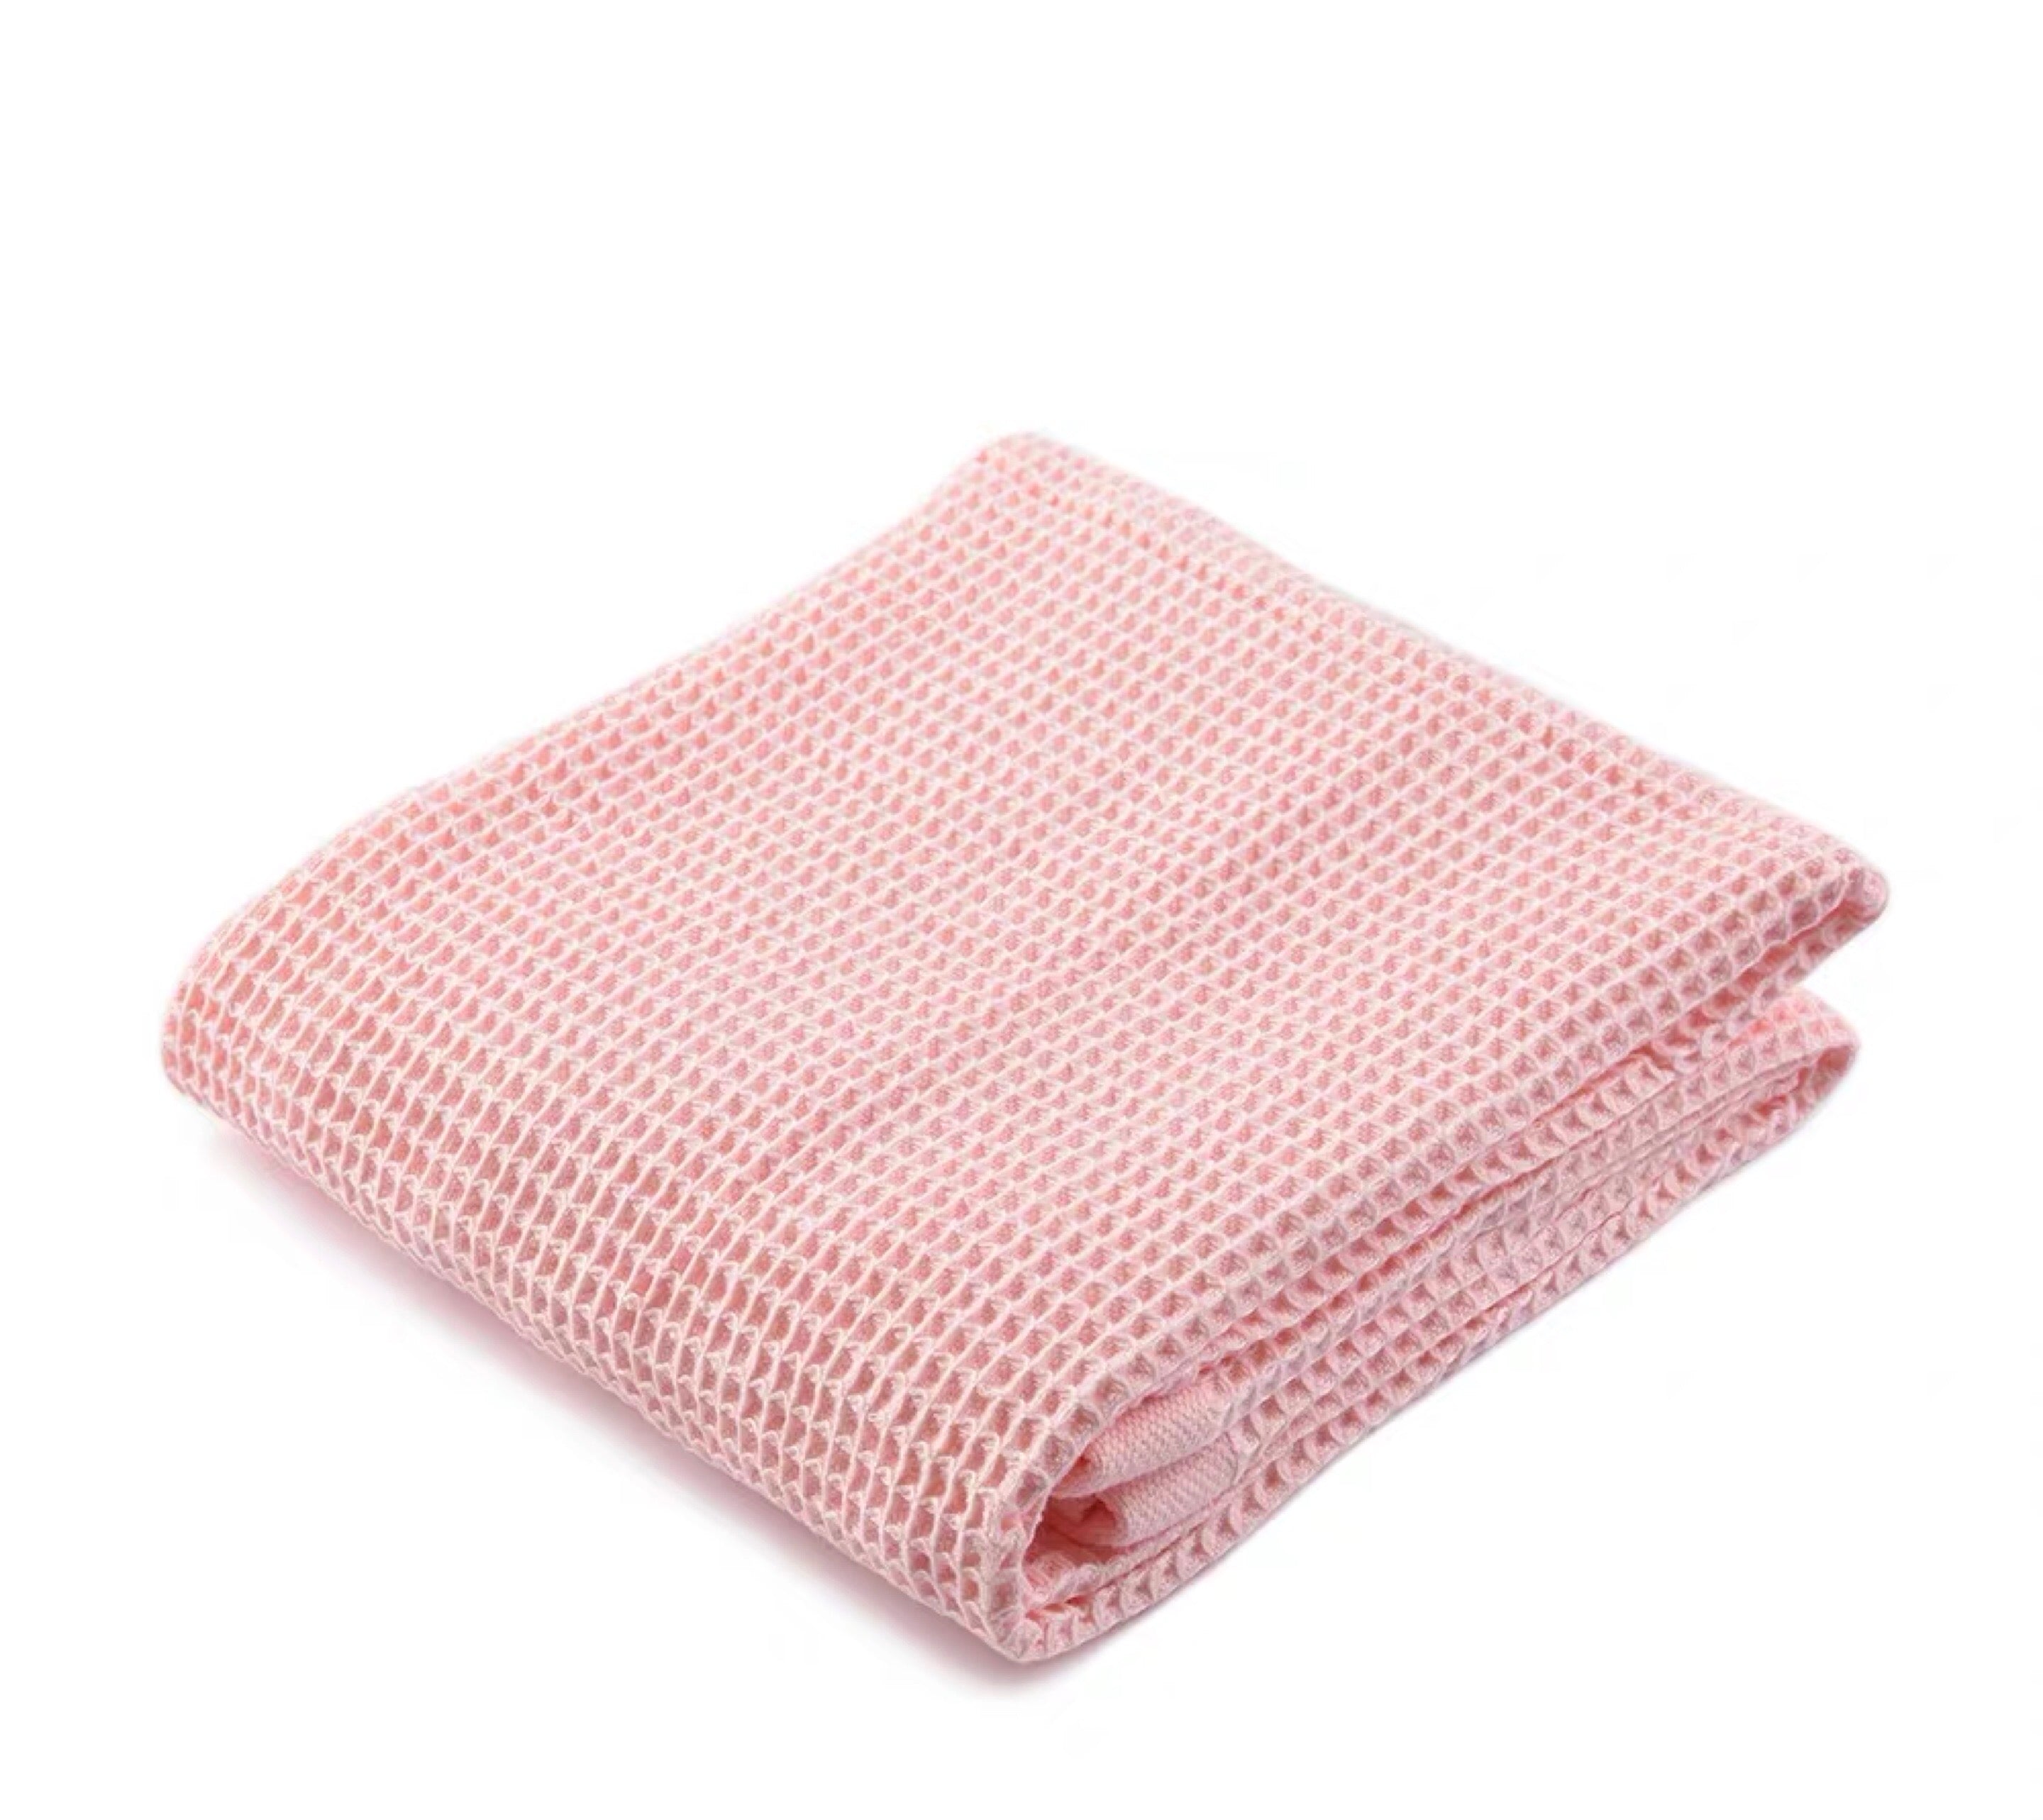 Waffle Bath Towel in Canary by PROSE Décor